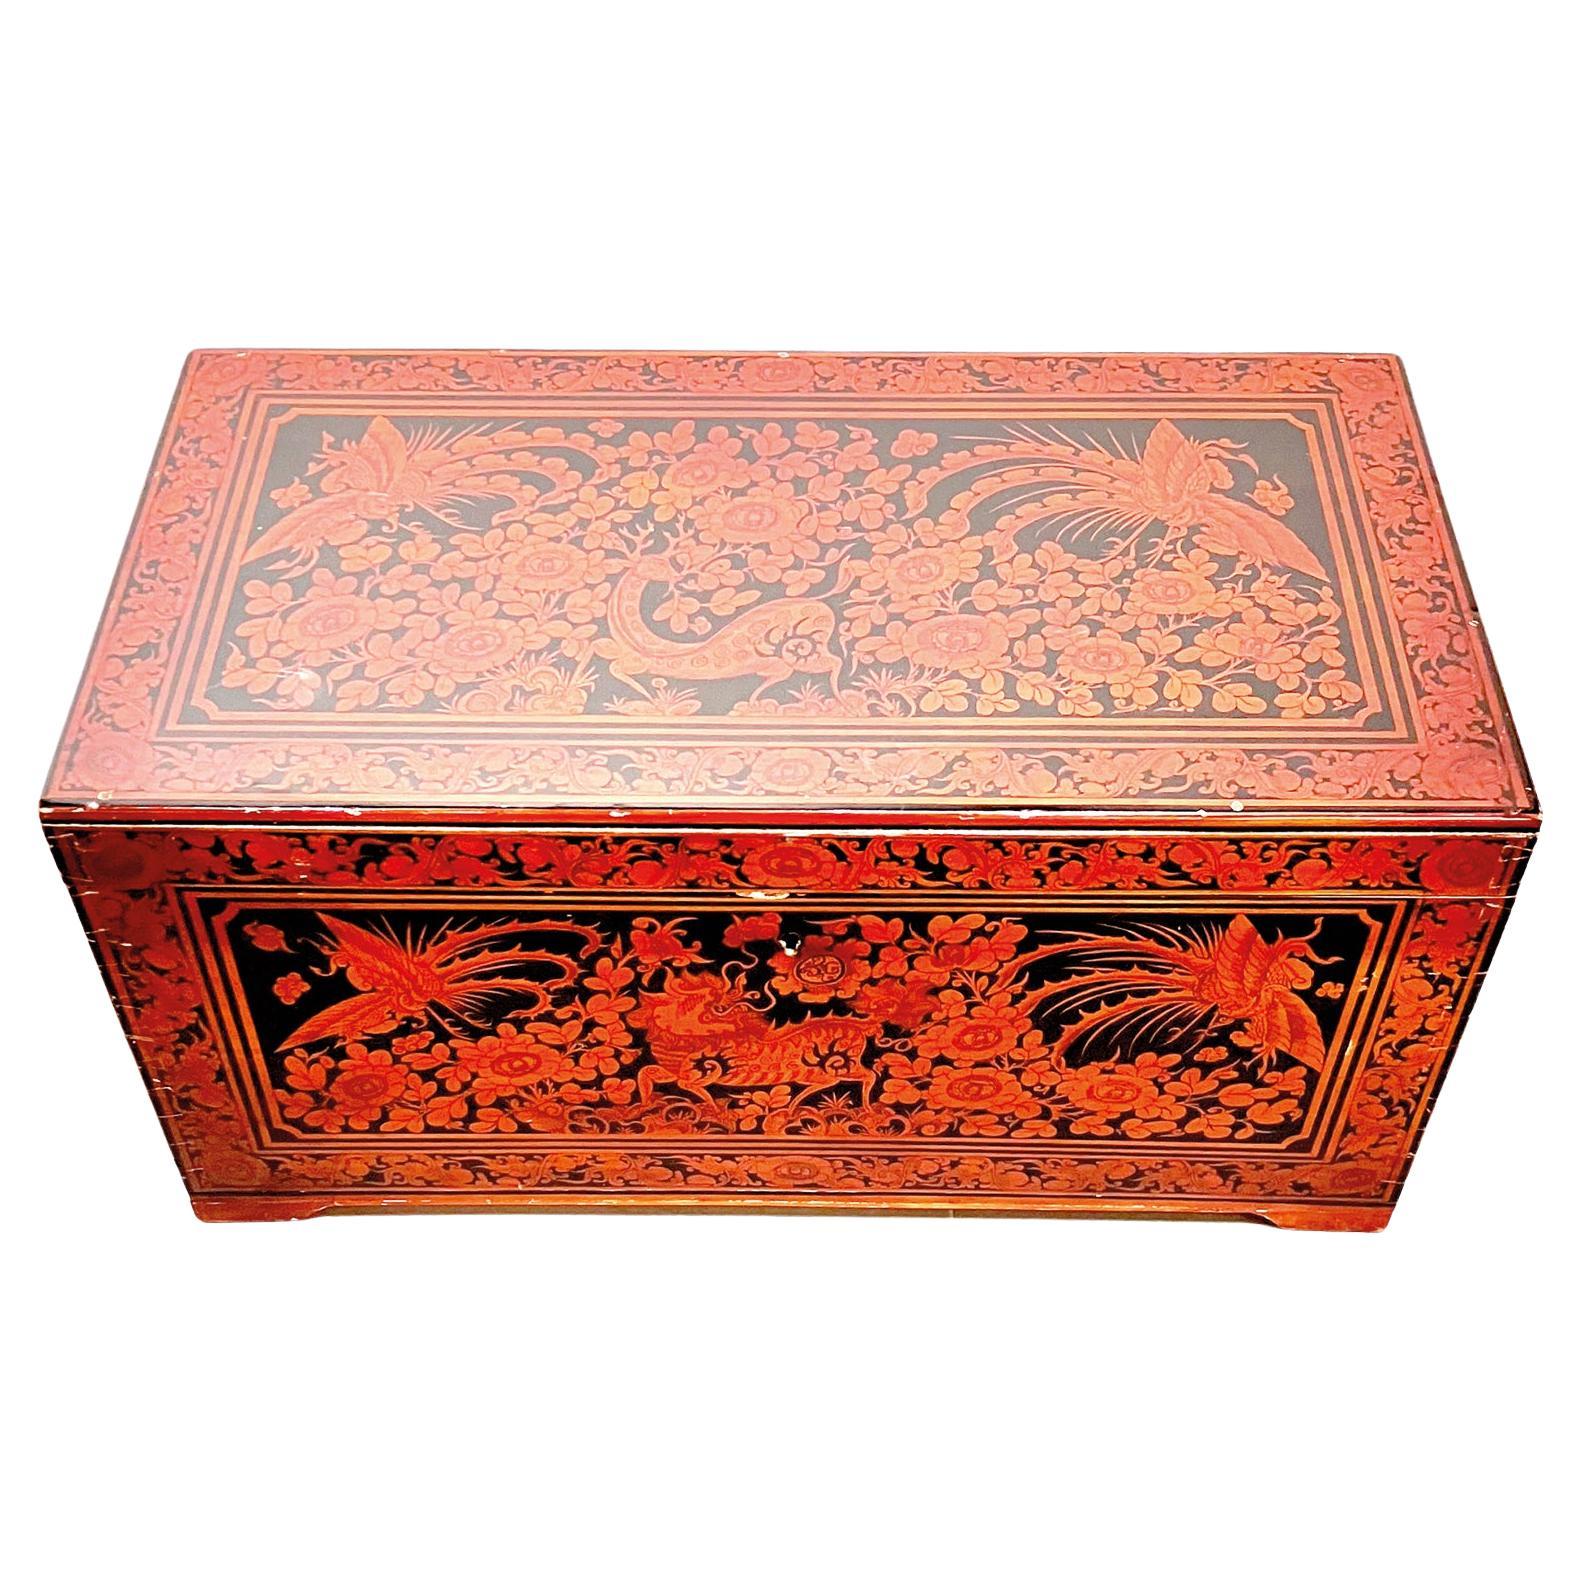 A trunk of substantial size and style. The interior hosts a large main compartment with a section which sits on top with smaller compartments. ideal for small item storage. 
The exterior has beautifully ornate, hand painted red lacquered detailing.
